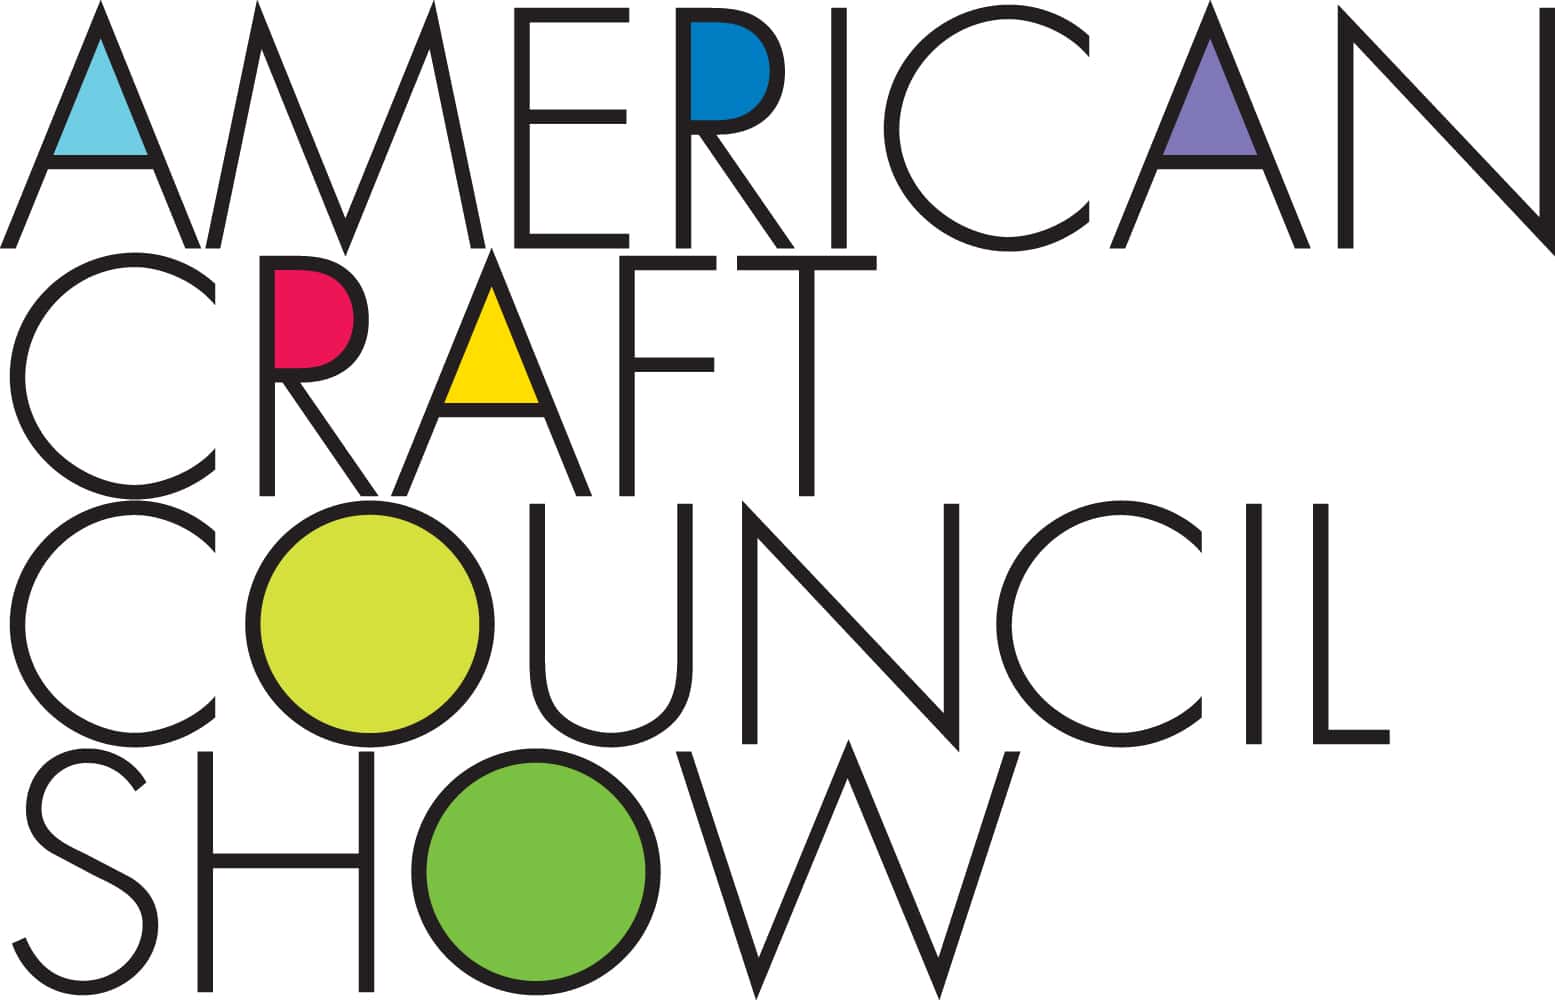 American Craft Council Show